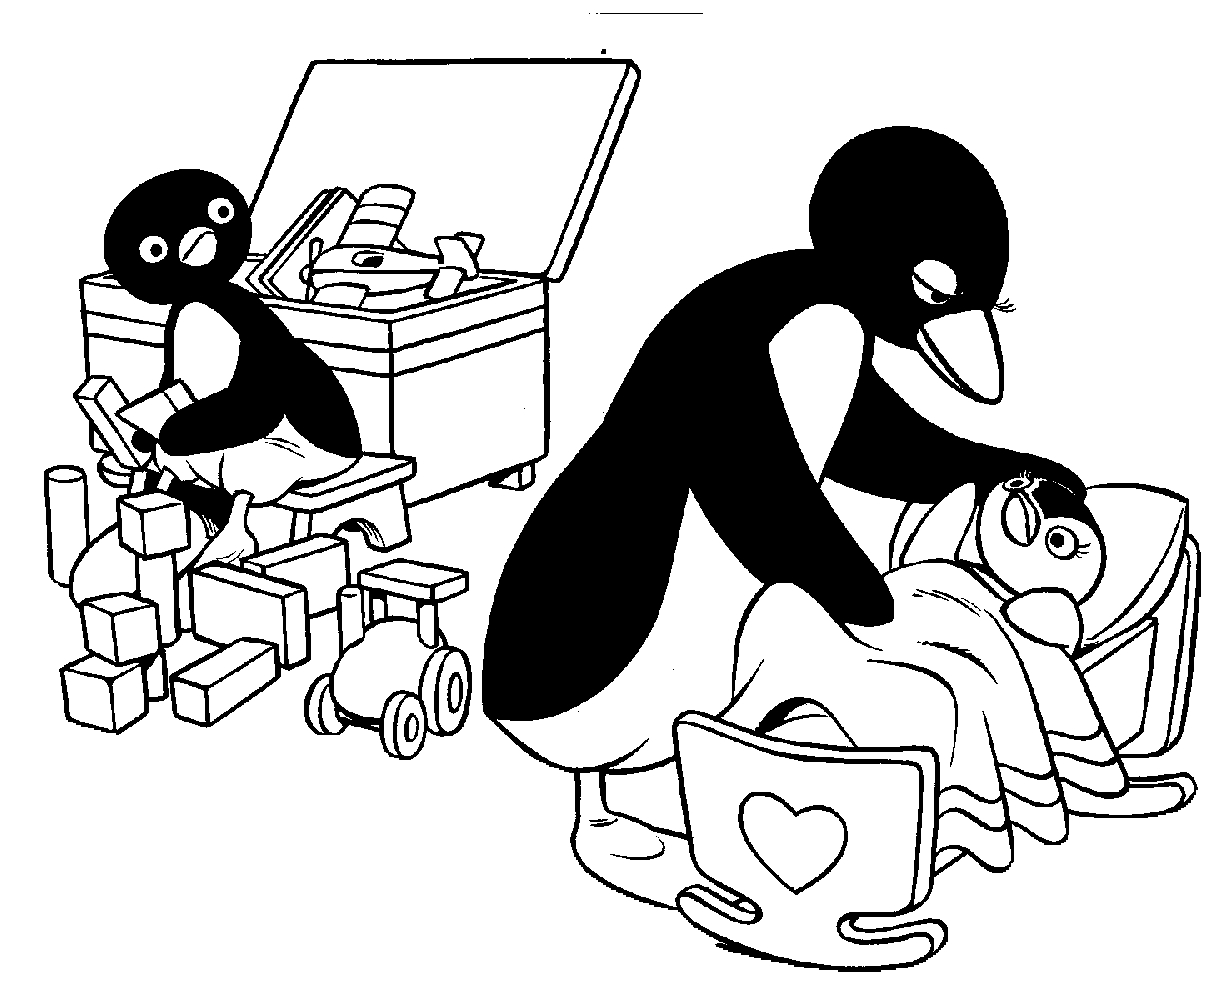   Pingu coloring page to print and coloring - Drawing 2